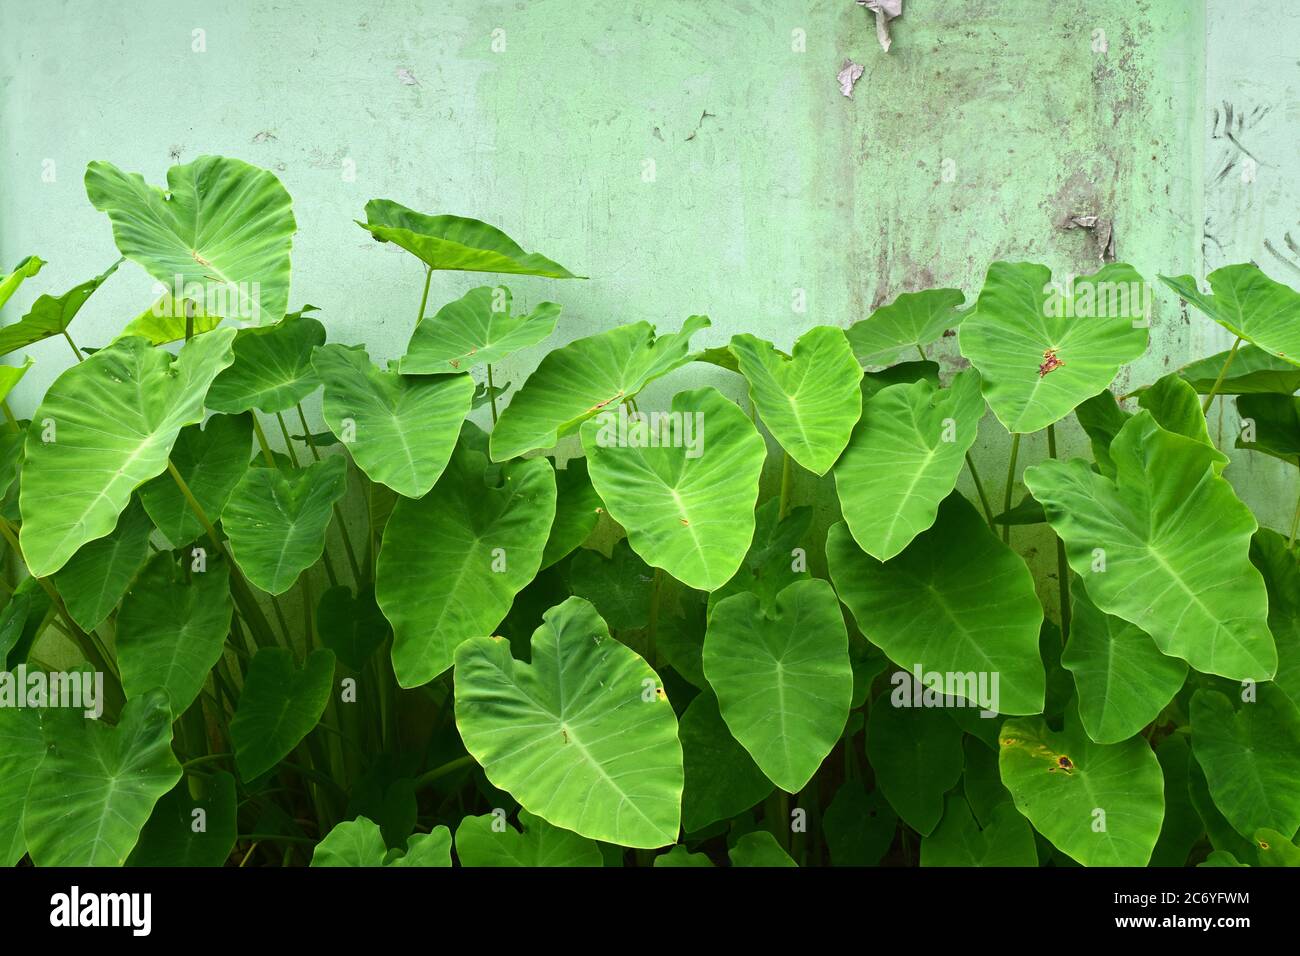 Green Edible root leaves in nature on front of bricks wall Stock Photo